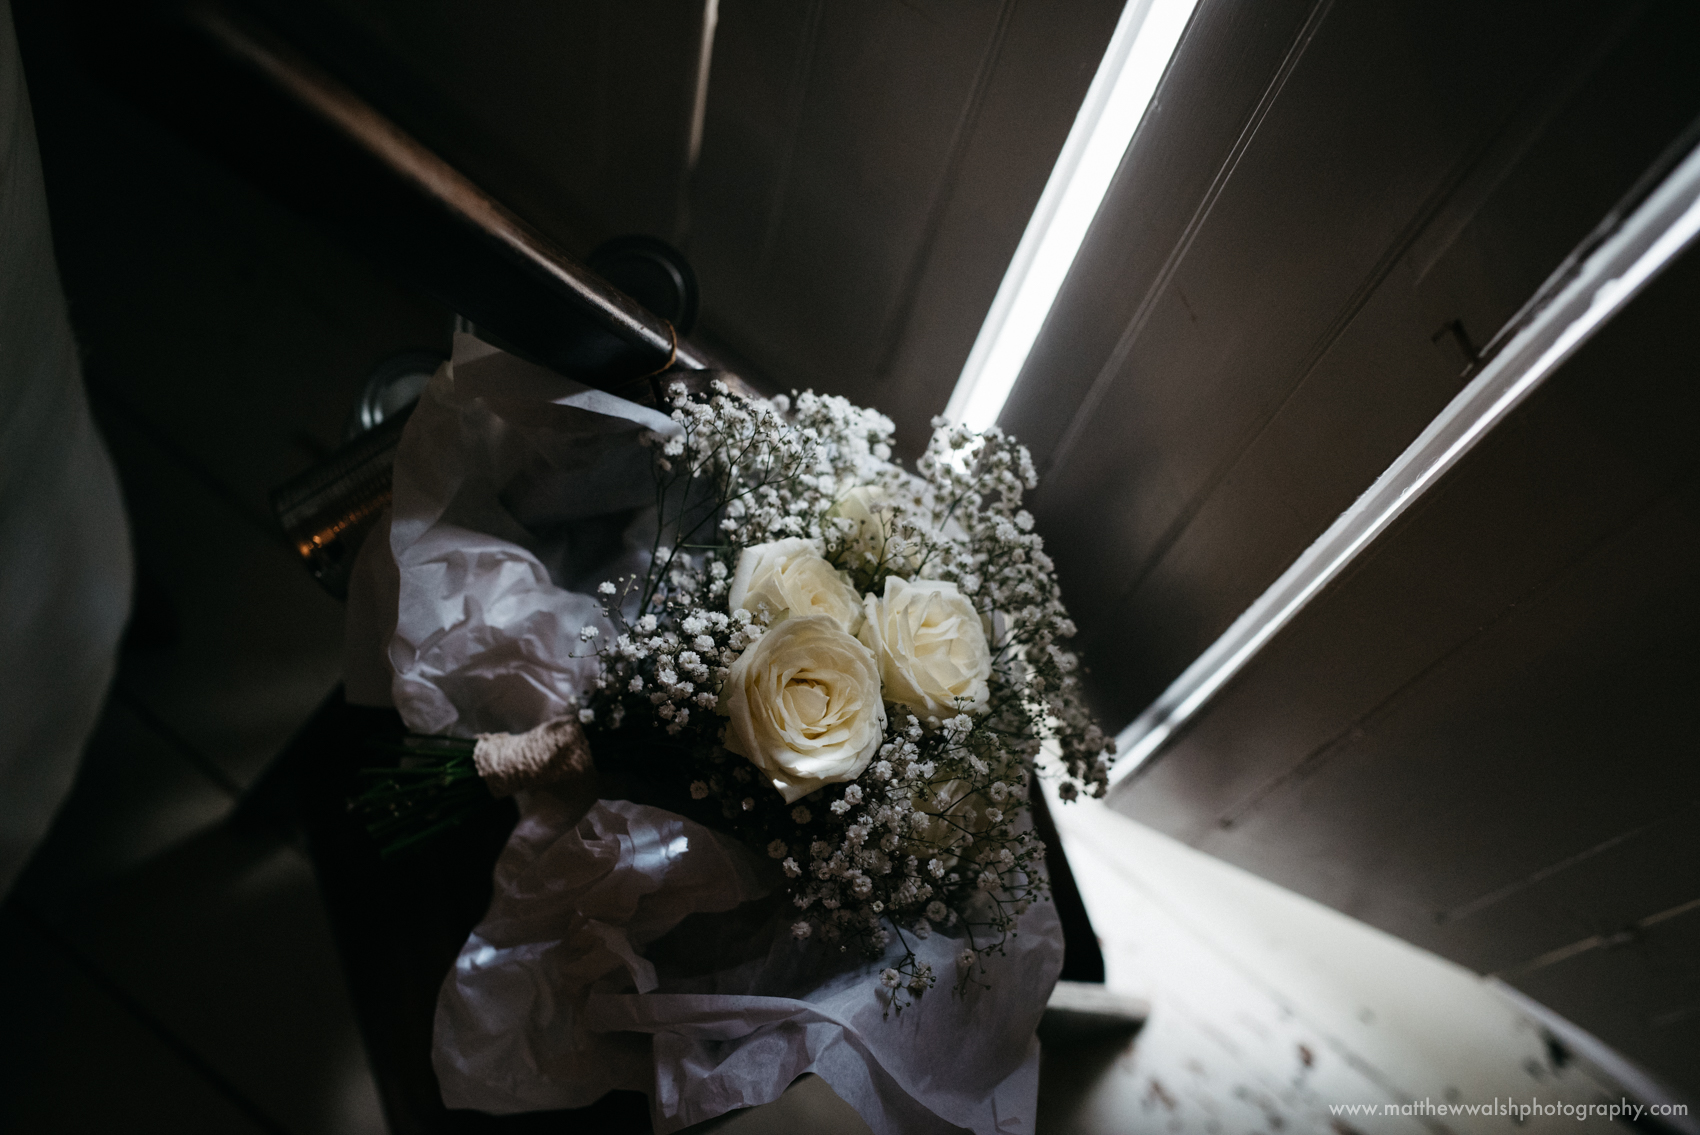 The brides bouquet also lit by a slither of light coming in through the french doors in the drawing room